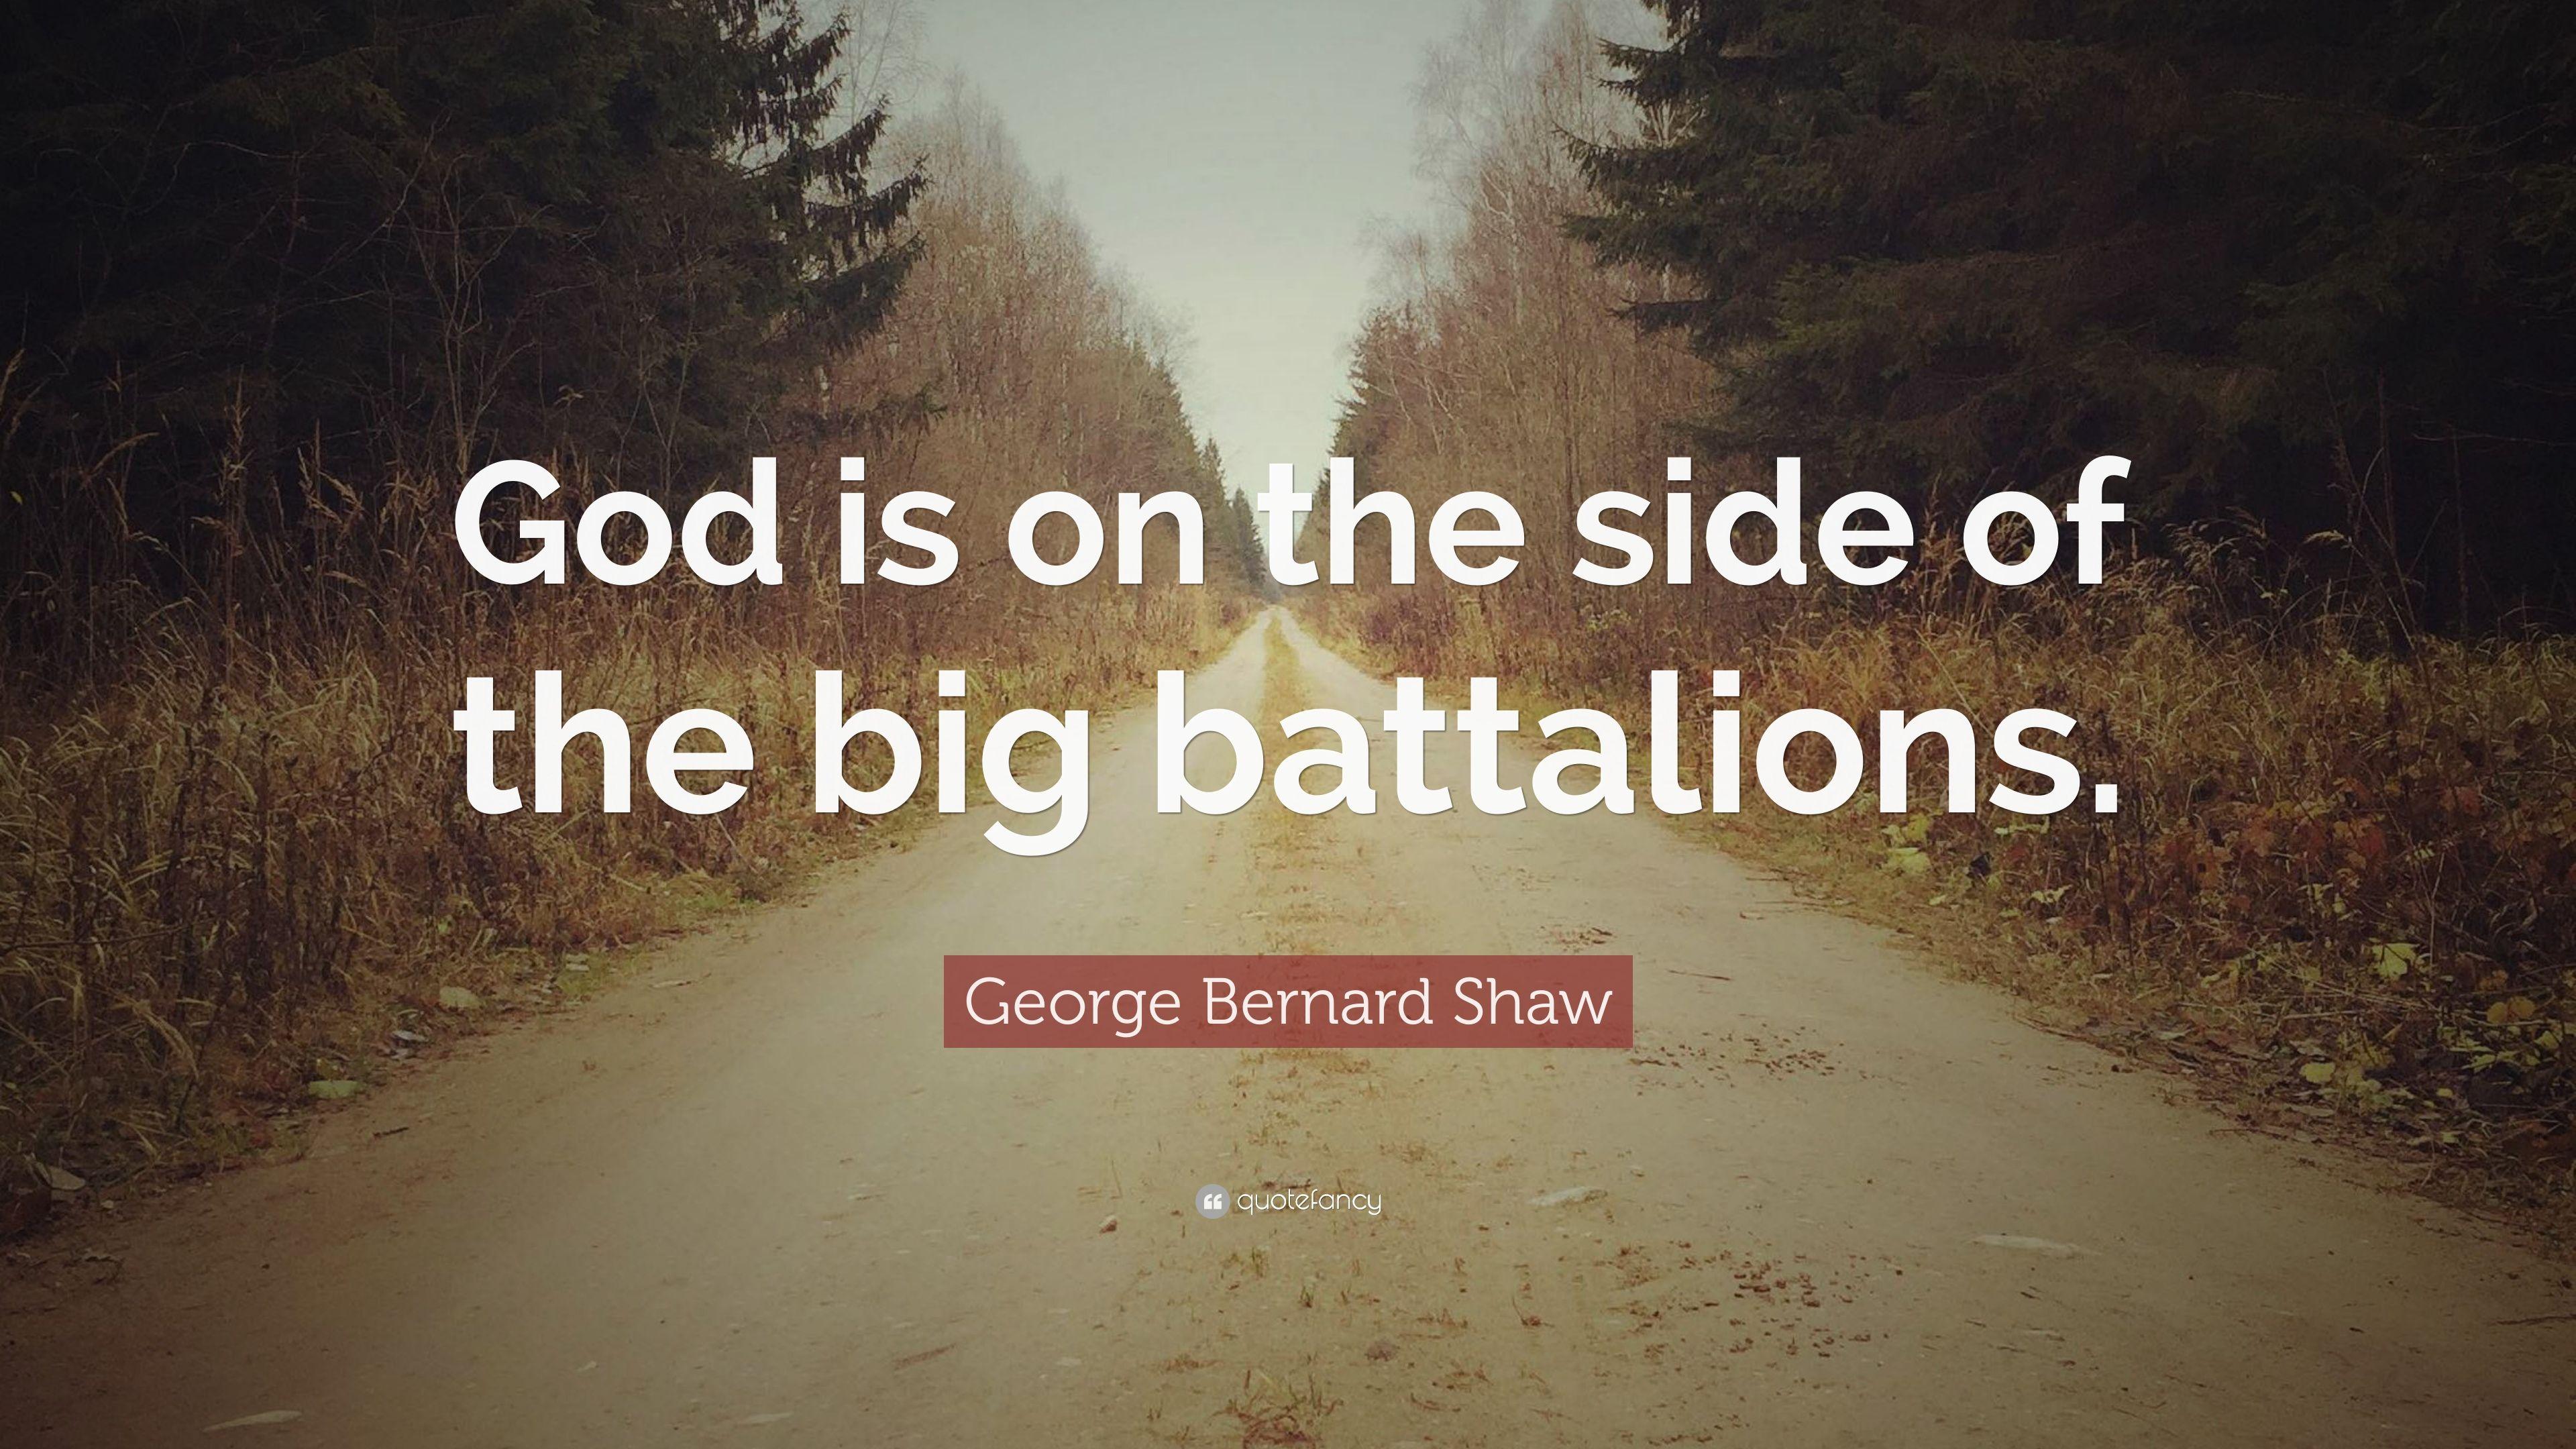 George Bernard Shaw Quote: “God is on the side of the big battalions